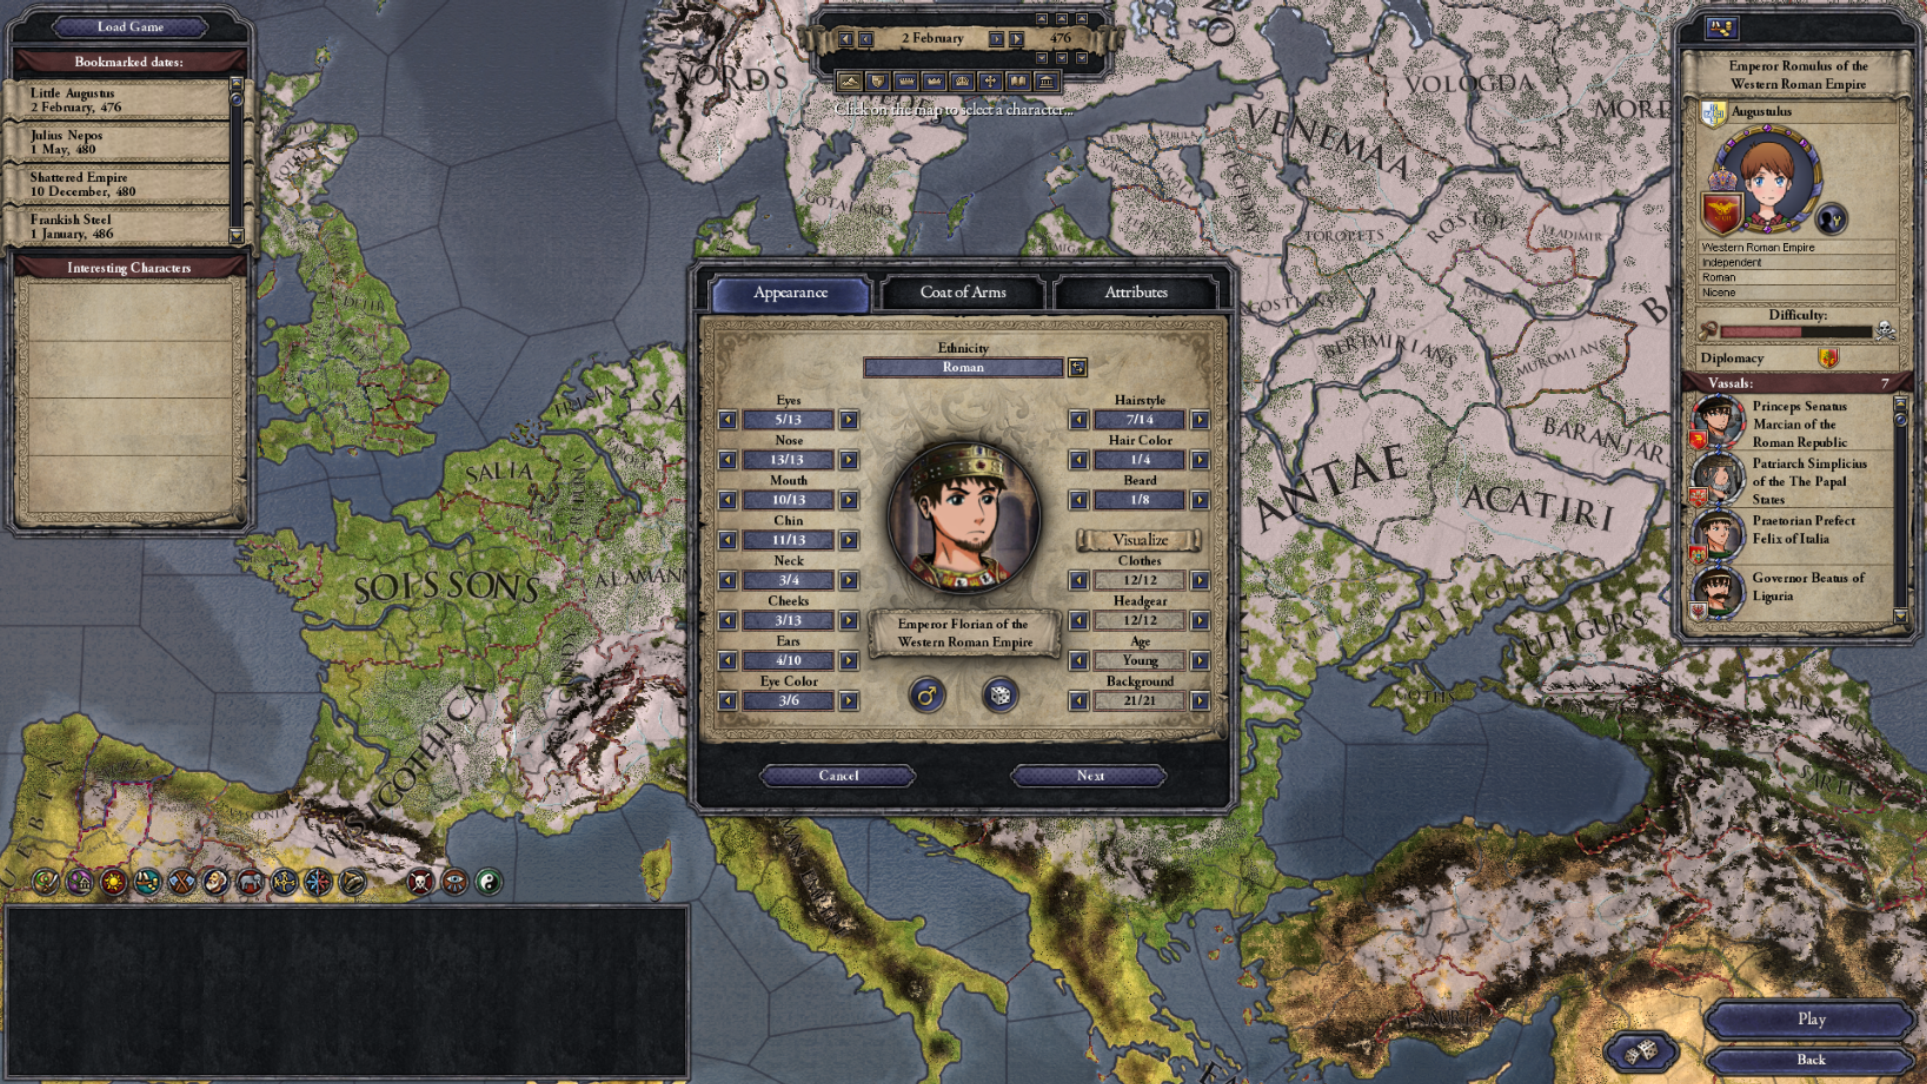 Image 4 - Anime portraits for WTWSMS 2.8 mod for Crusader Kings II.